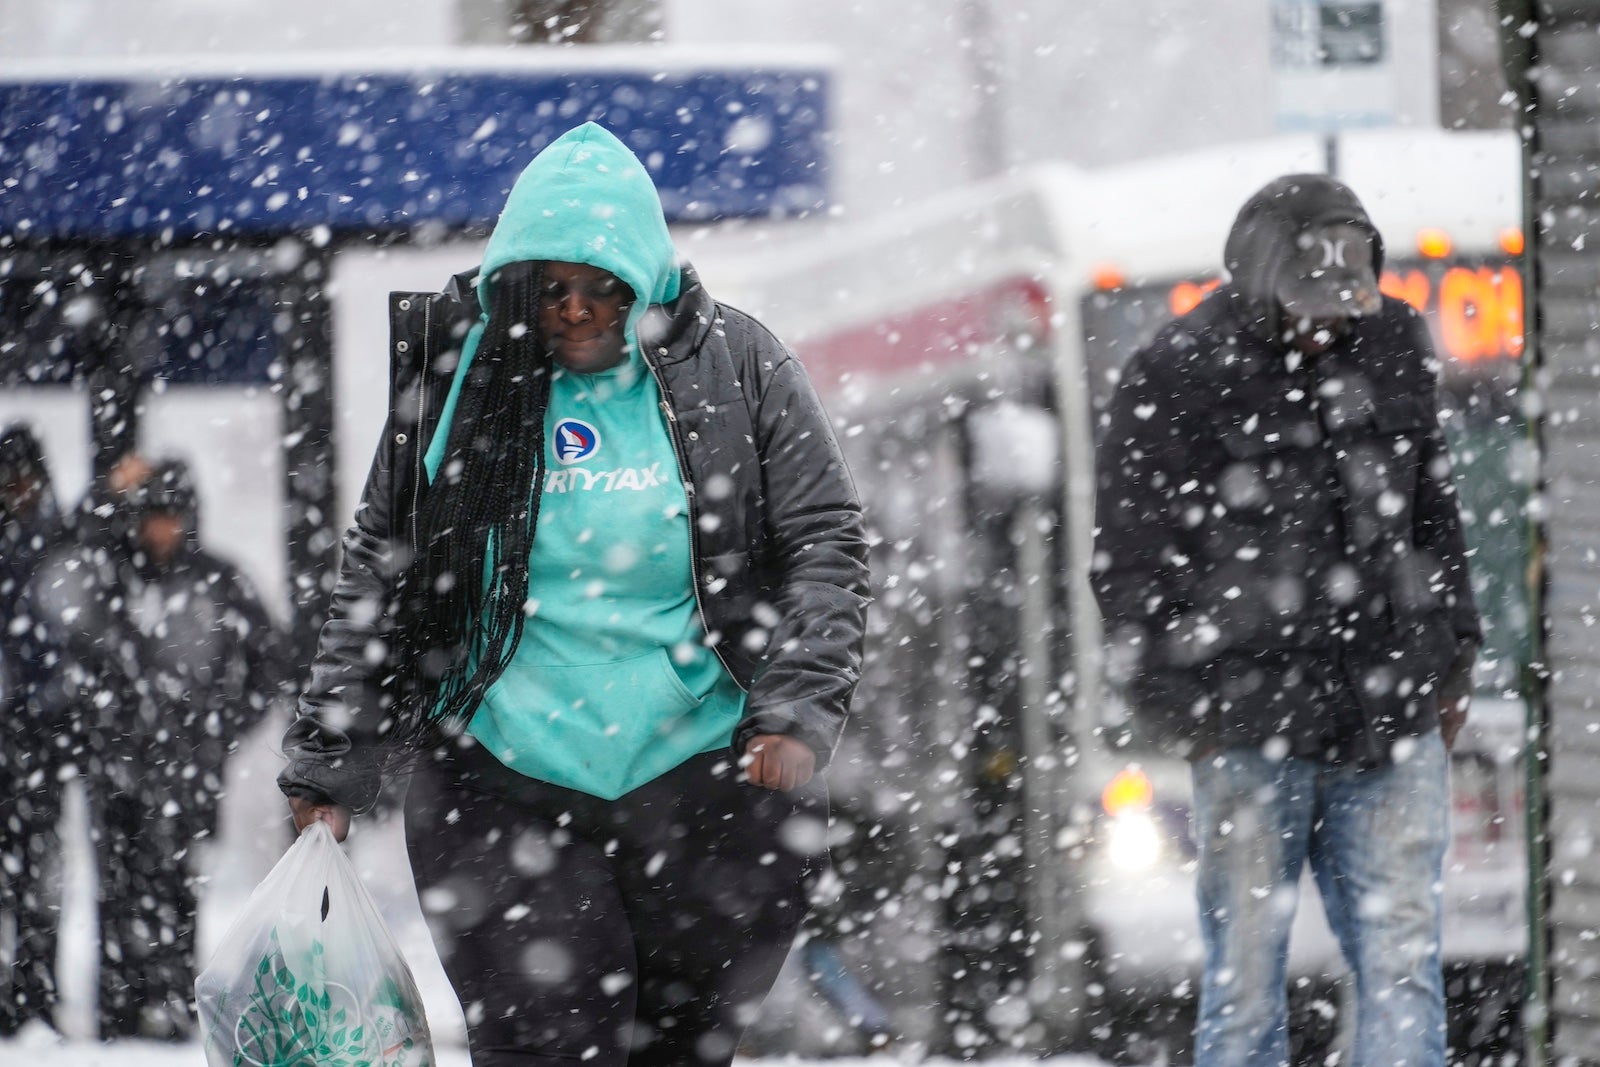 Philly winter storm: Snow moves out of Delaware Valley - WHYY